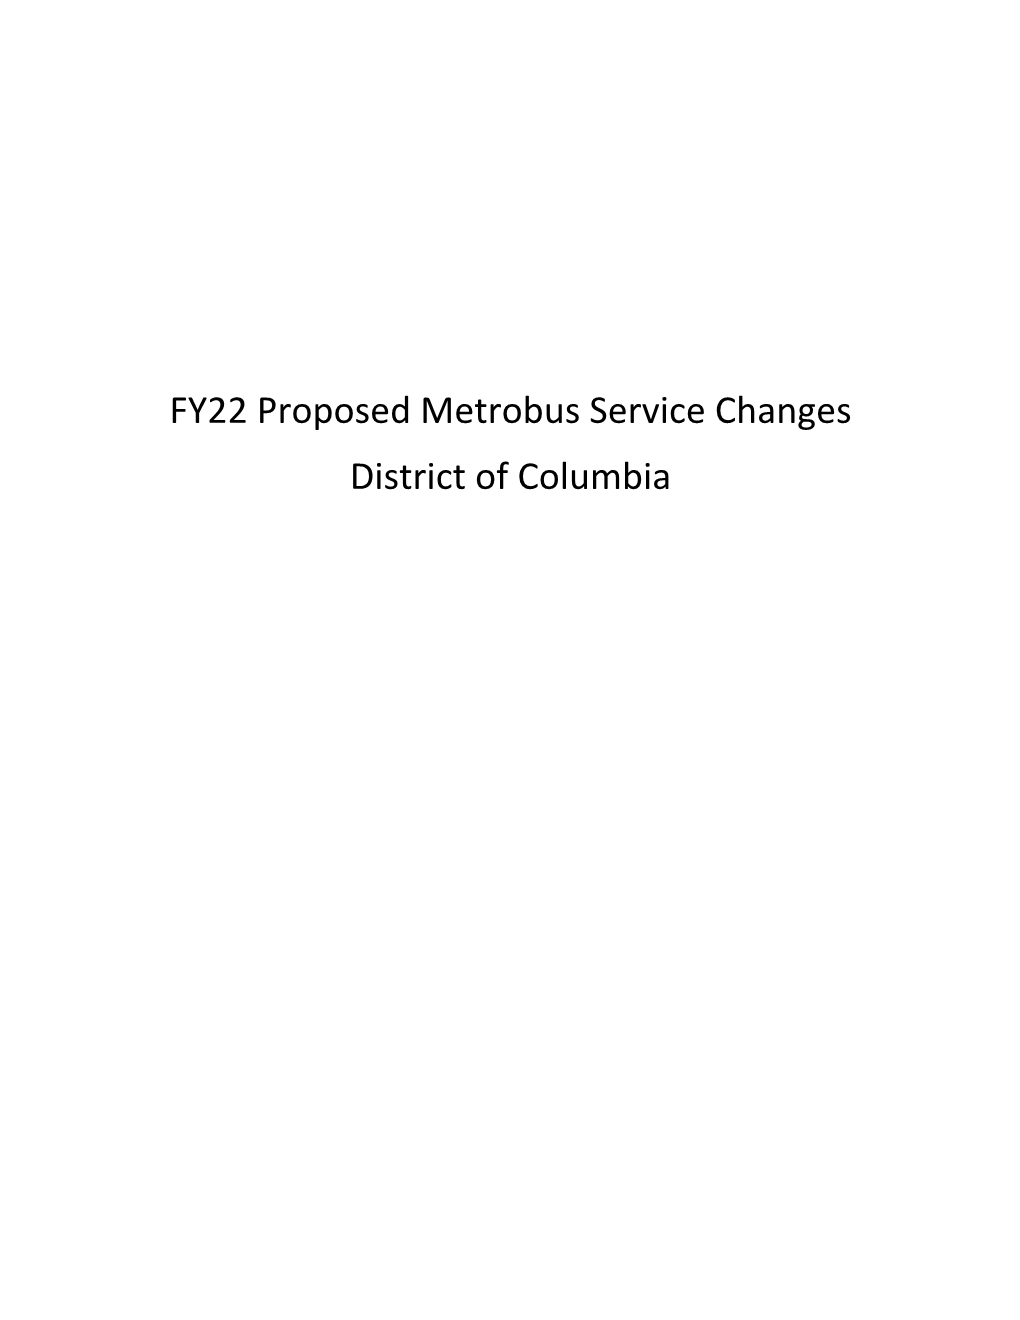 Proposed DC Bus Changes